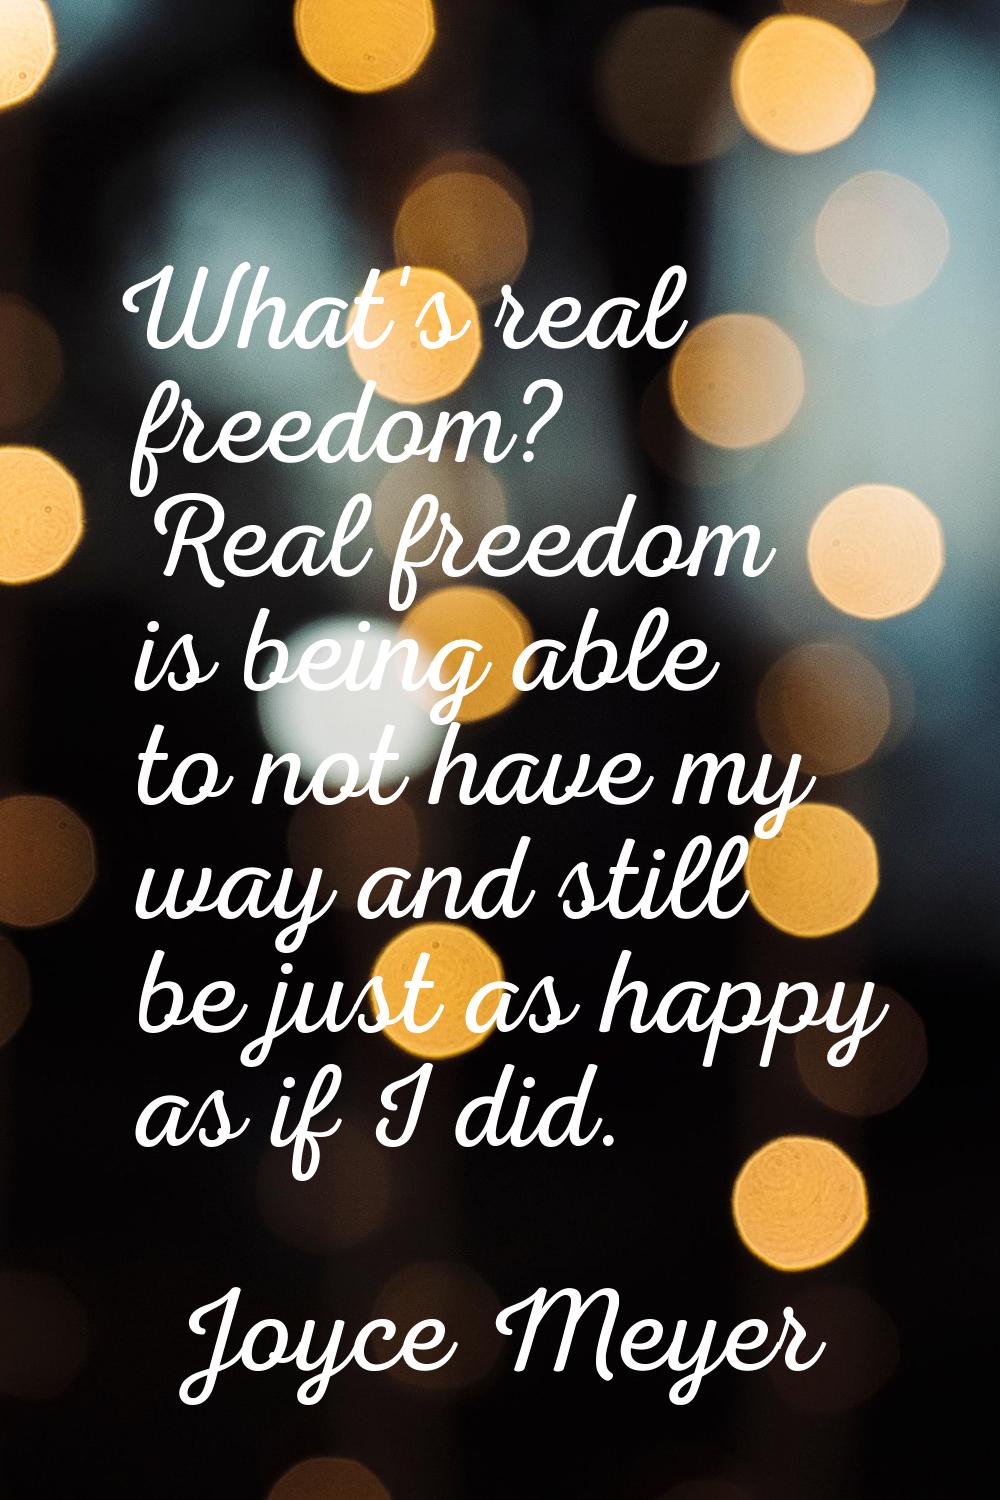 What's real freedom? Real freedom is being able to not have my way and still be just as happy as if